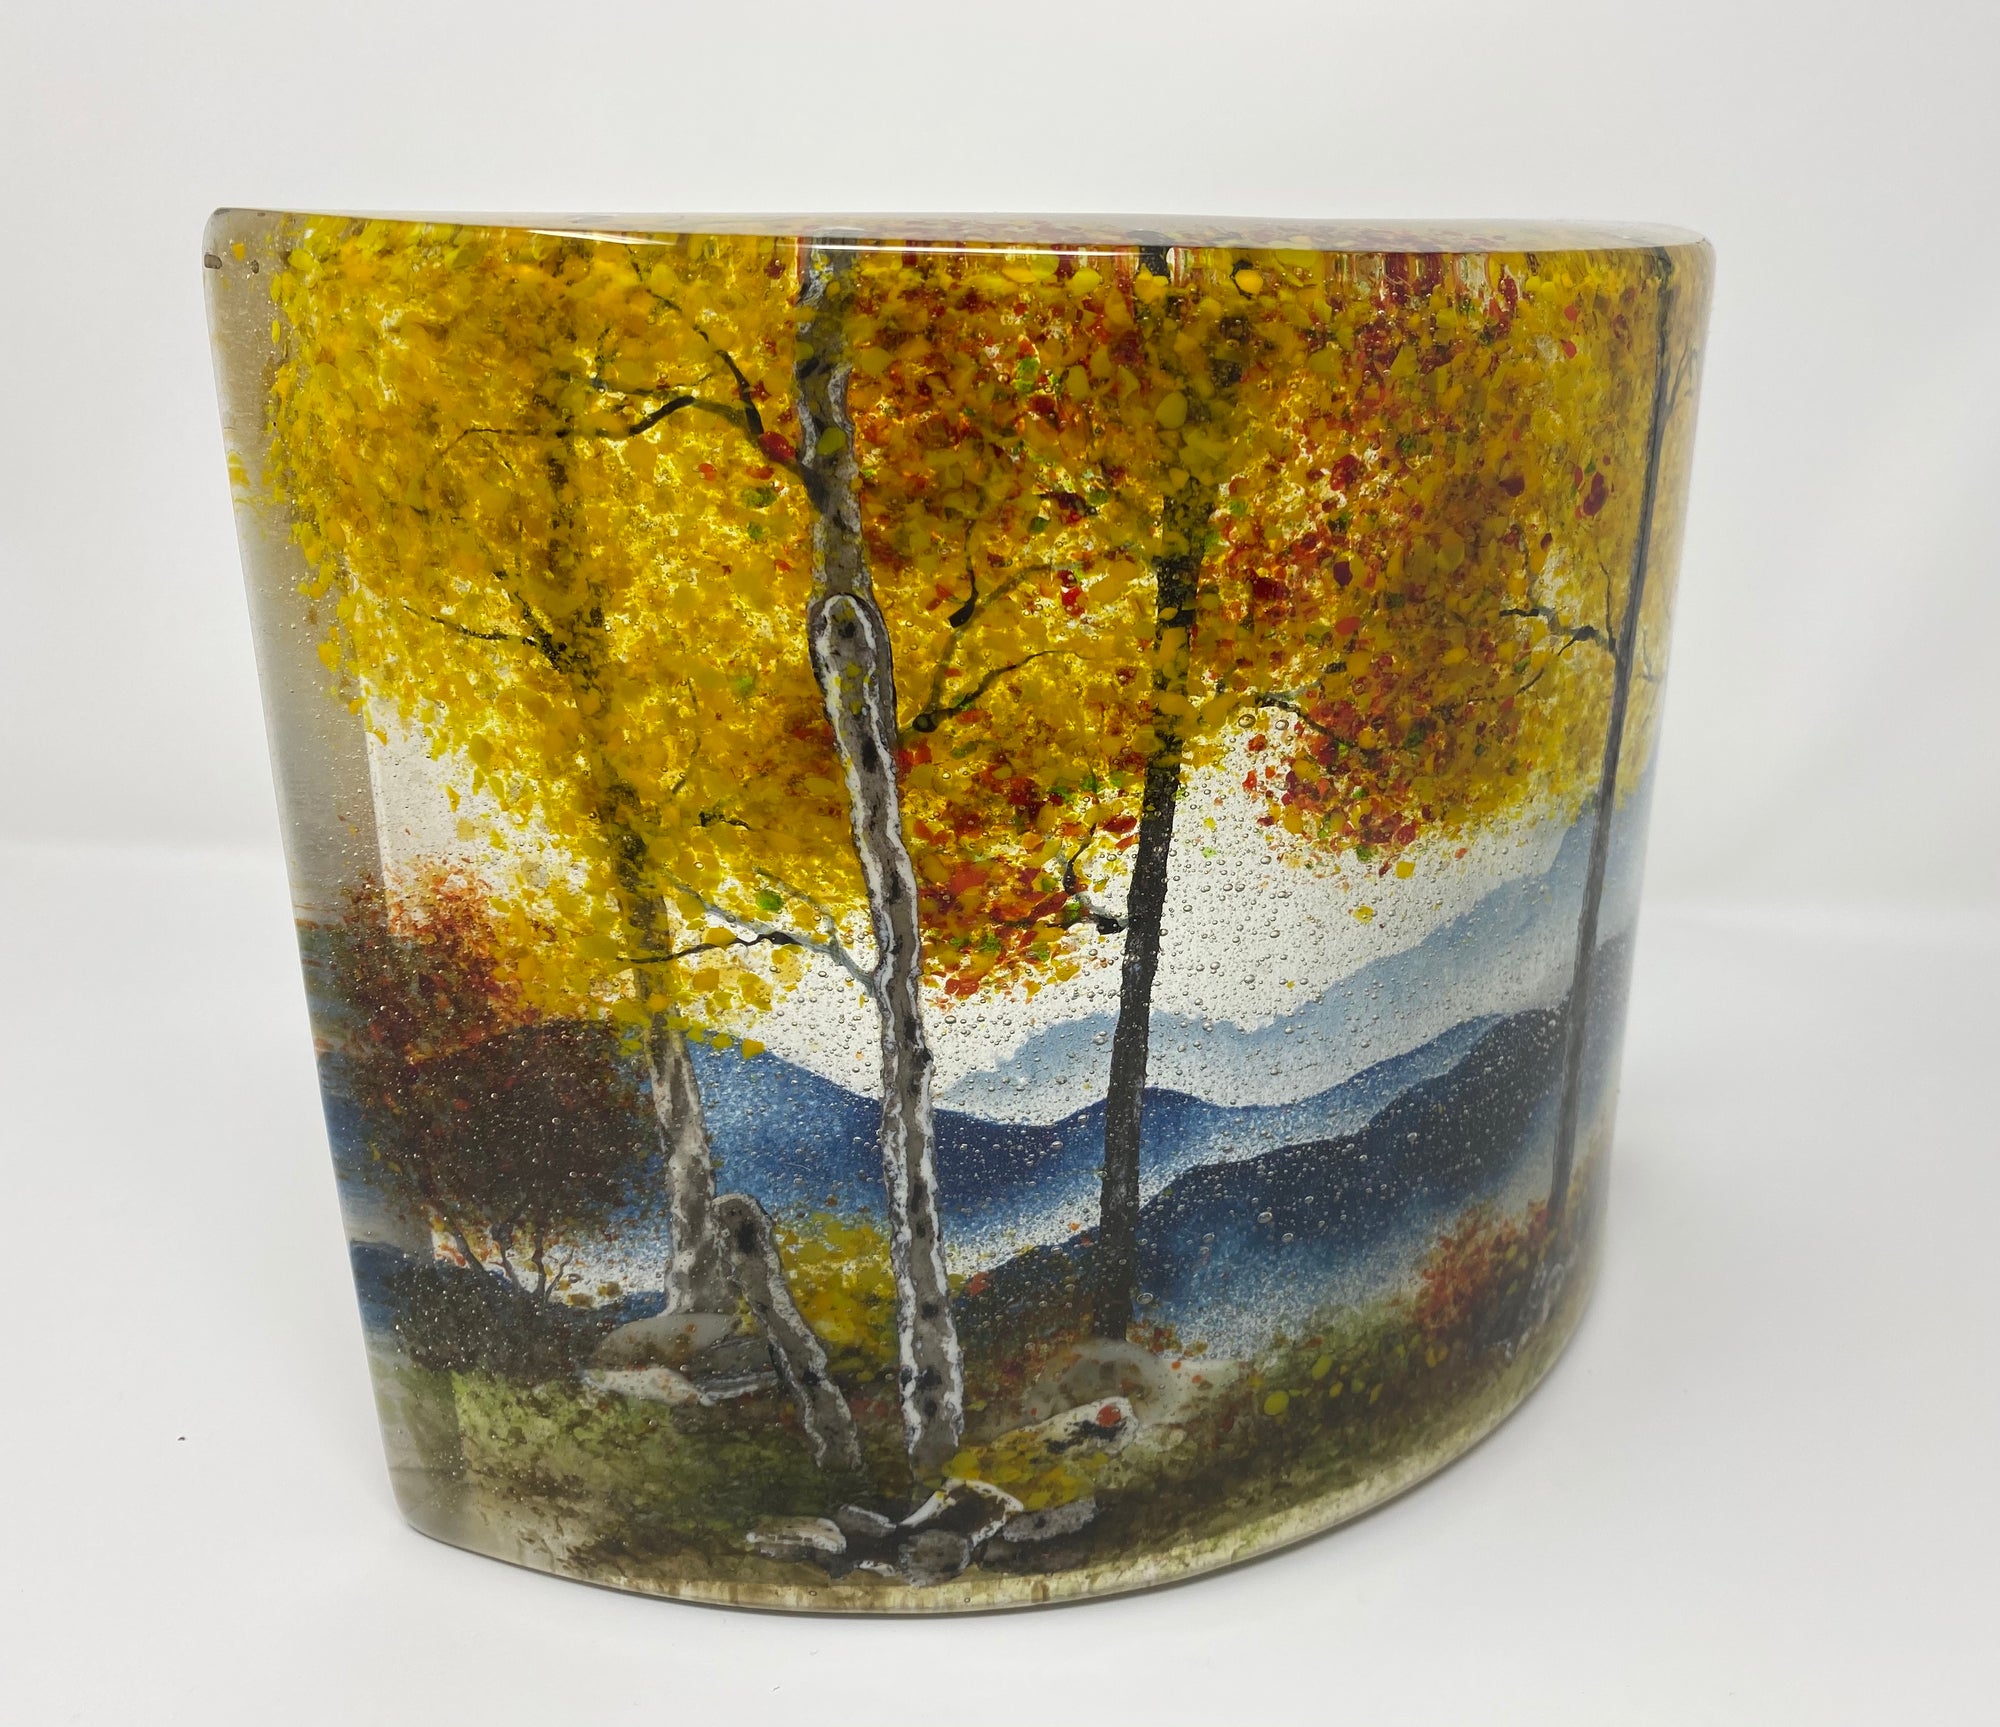 Landscapes in Glass